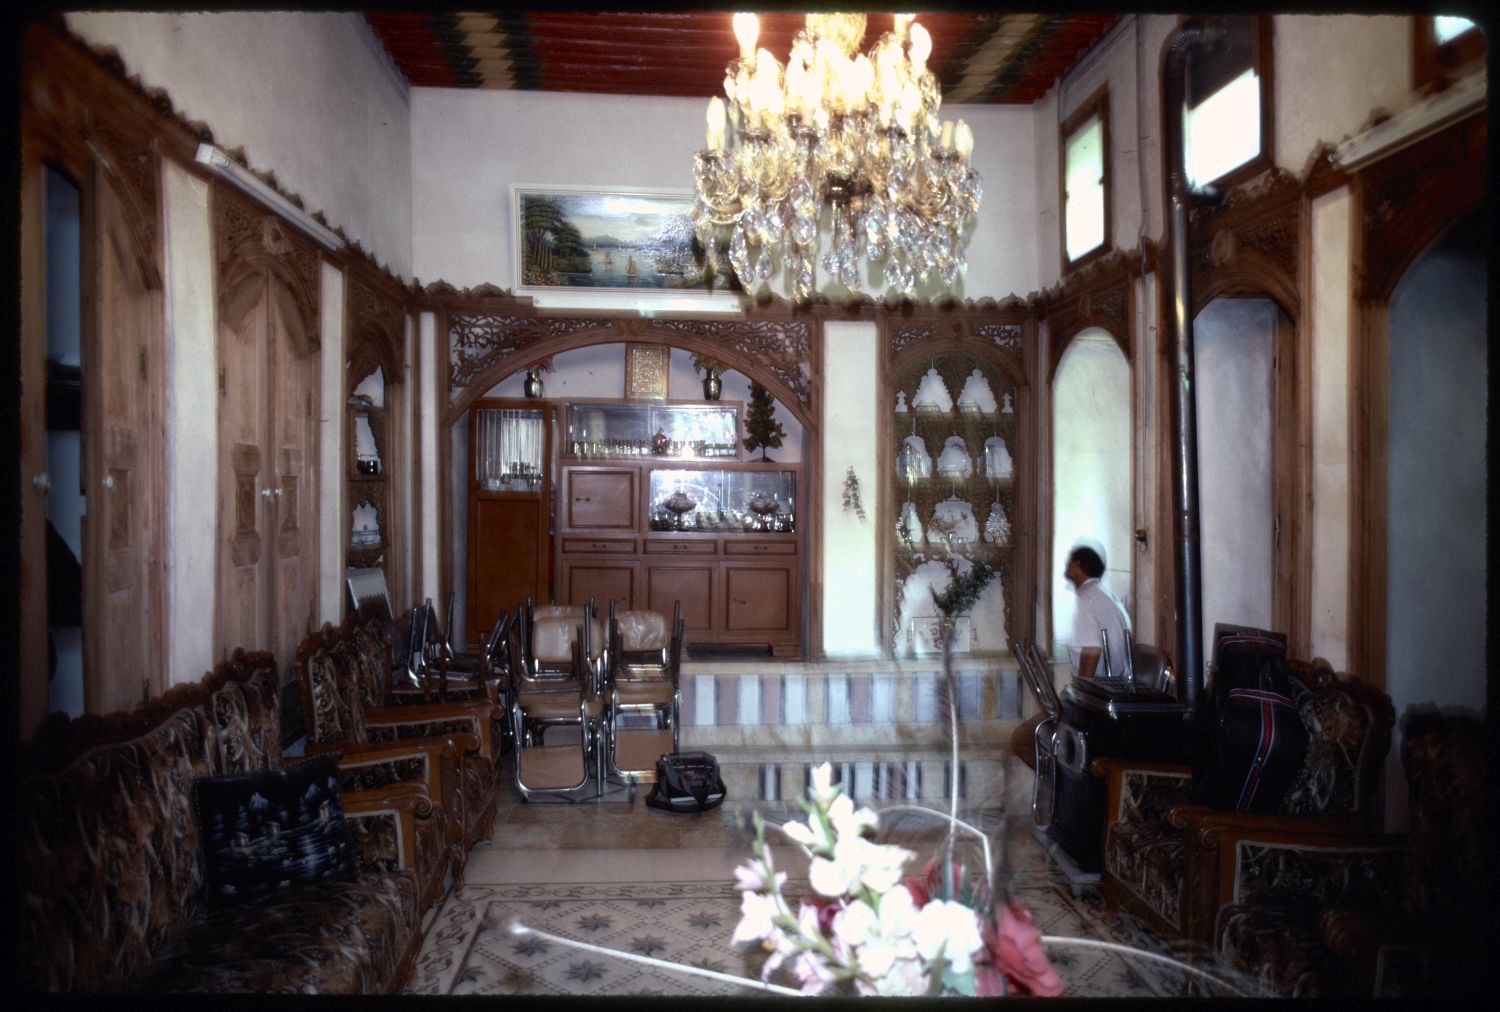 View of reception room.